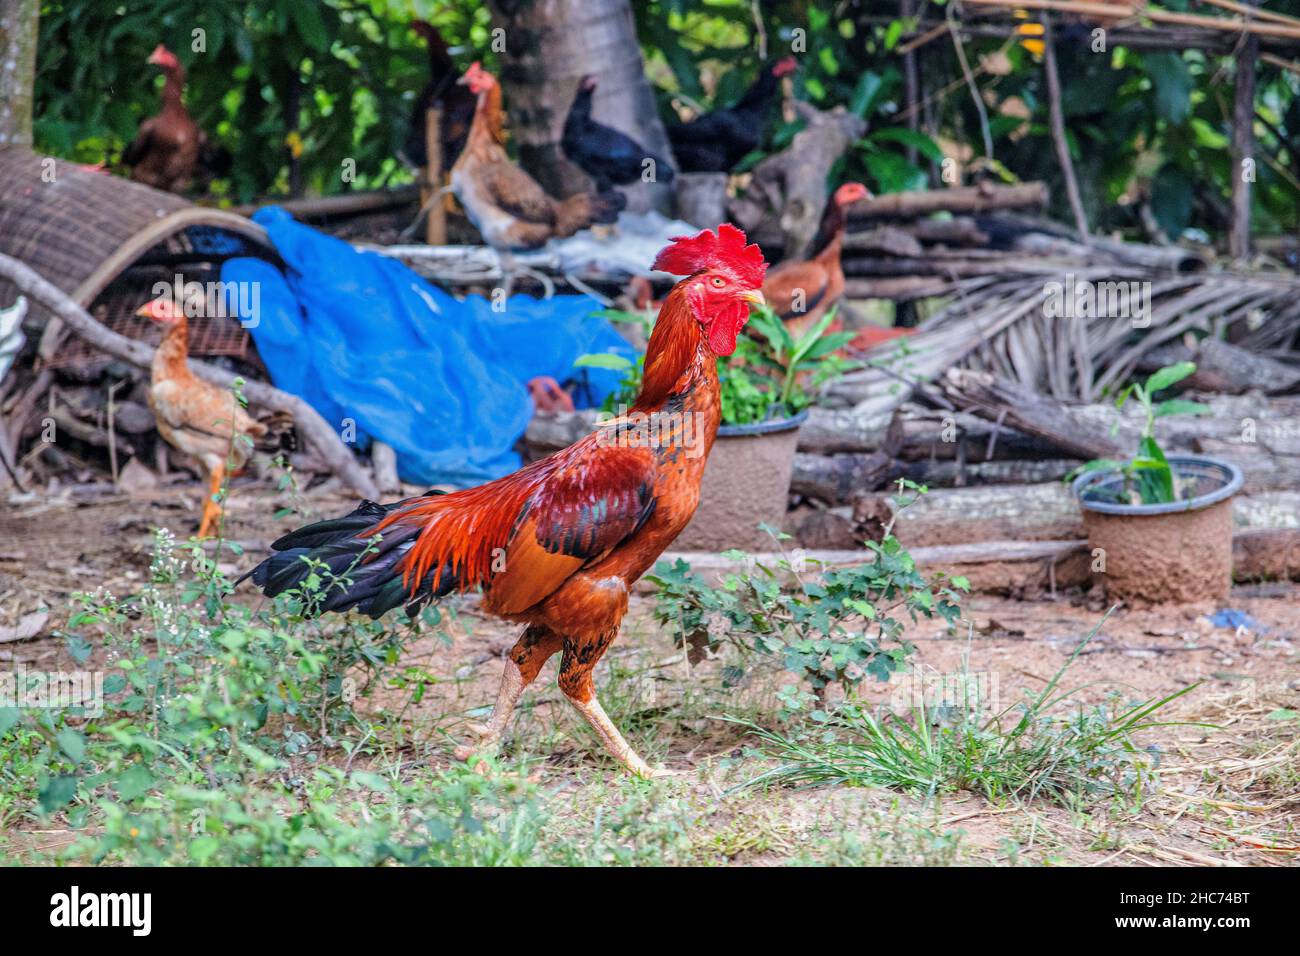 Closeup of a skinny chicken running in a coop with other chickens behind it Stock Photo